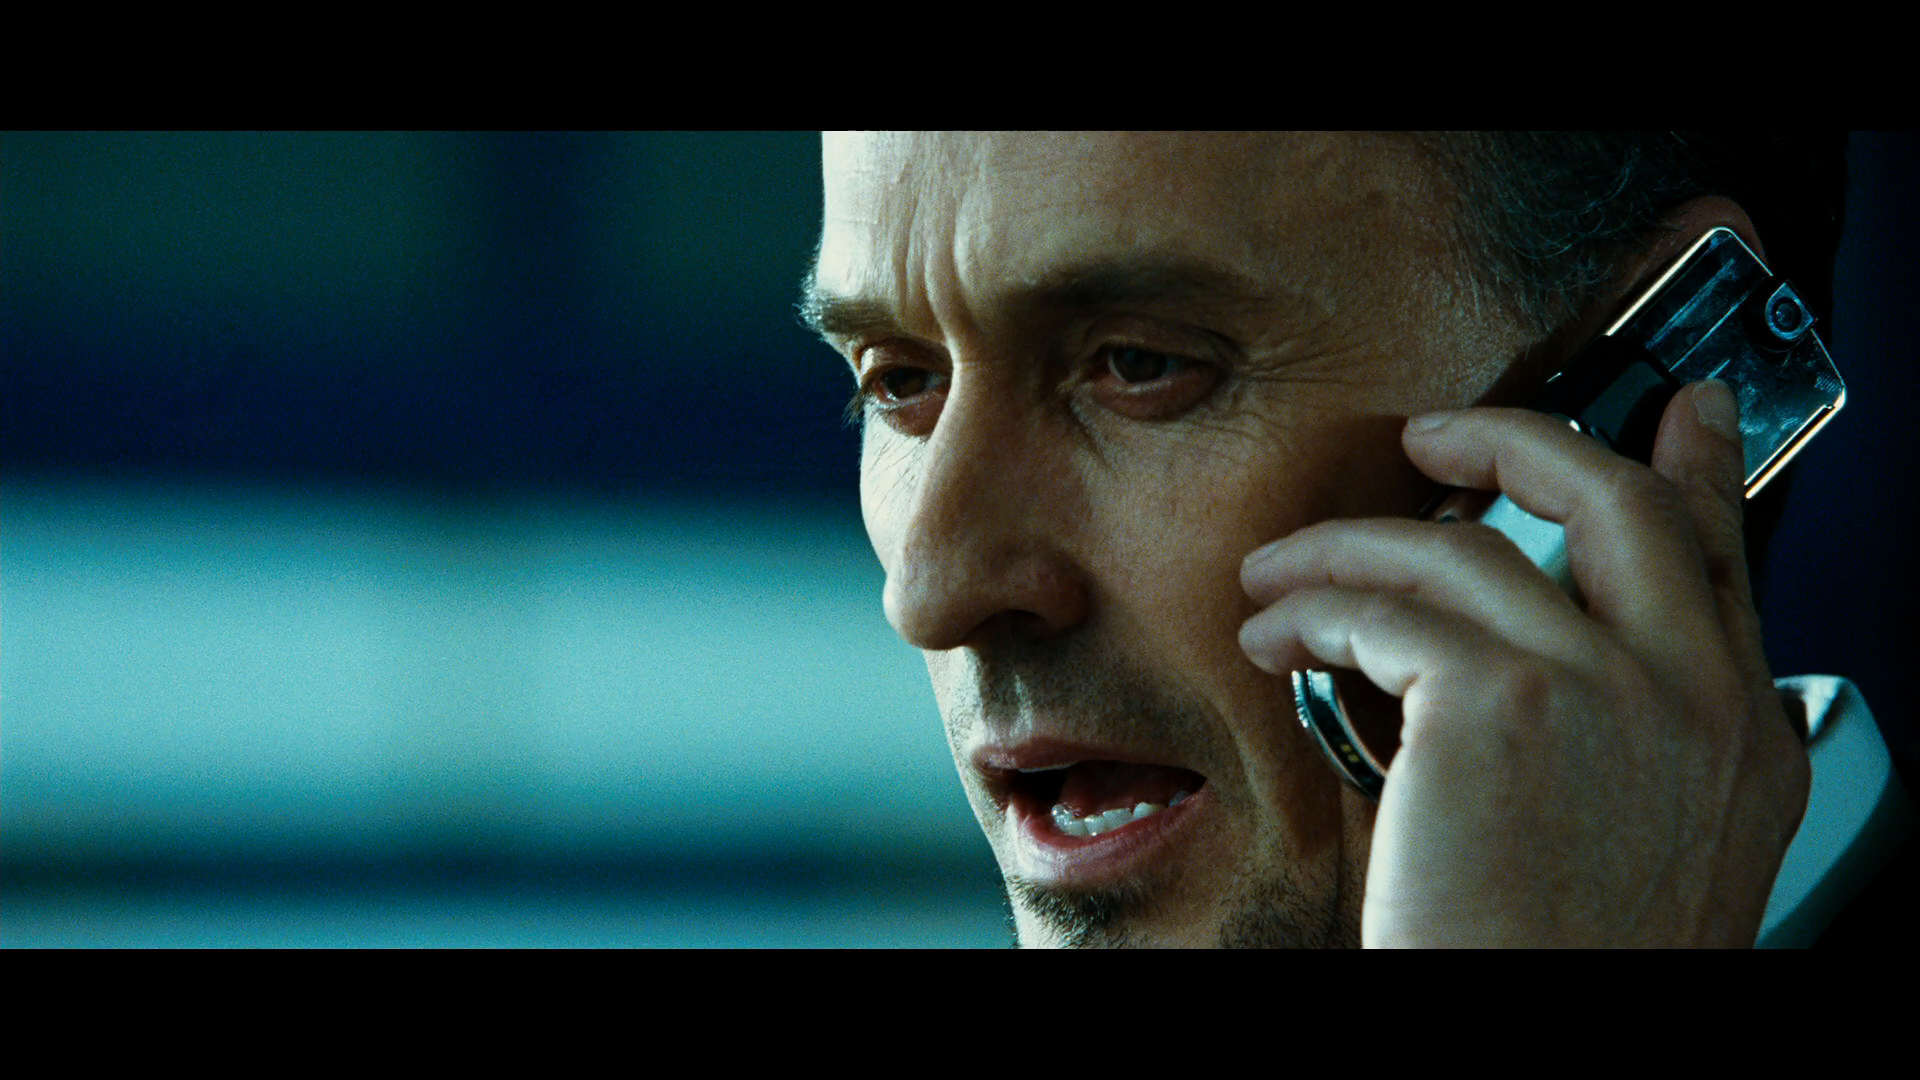 Transporter 3.2008.BD.Remux.1080p.h264.Rus.Eng.Commentary.mkv_snapshot_00.10.29_[2022.06.02_11.04.13].png